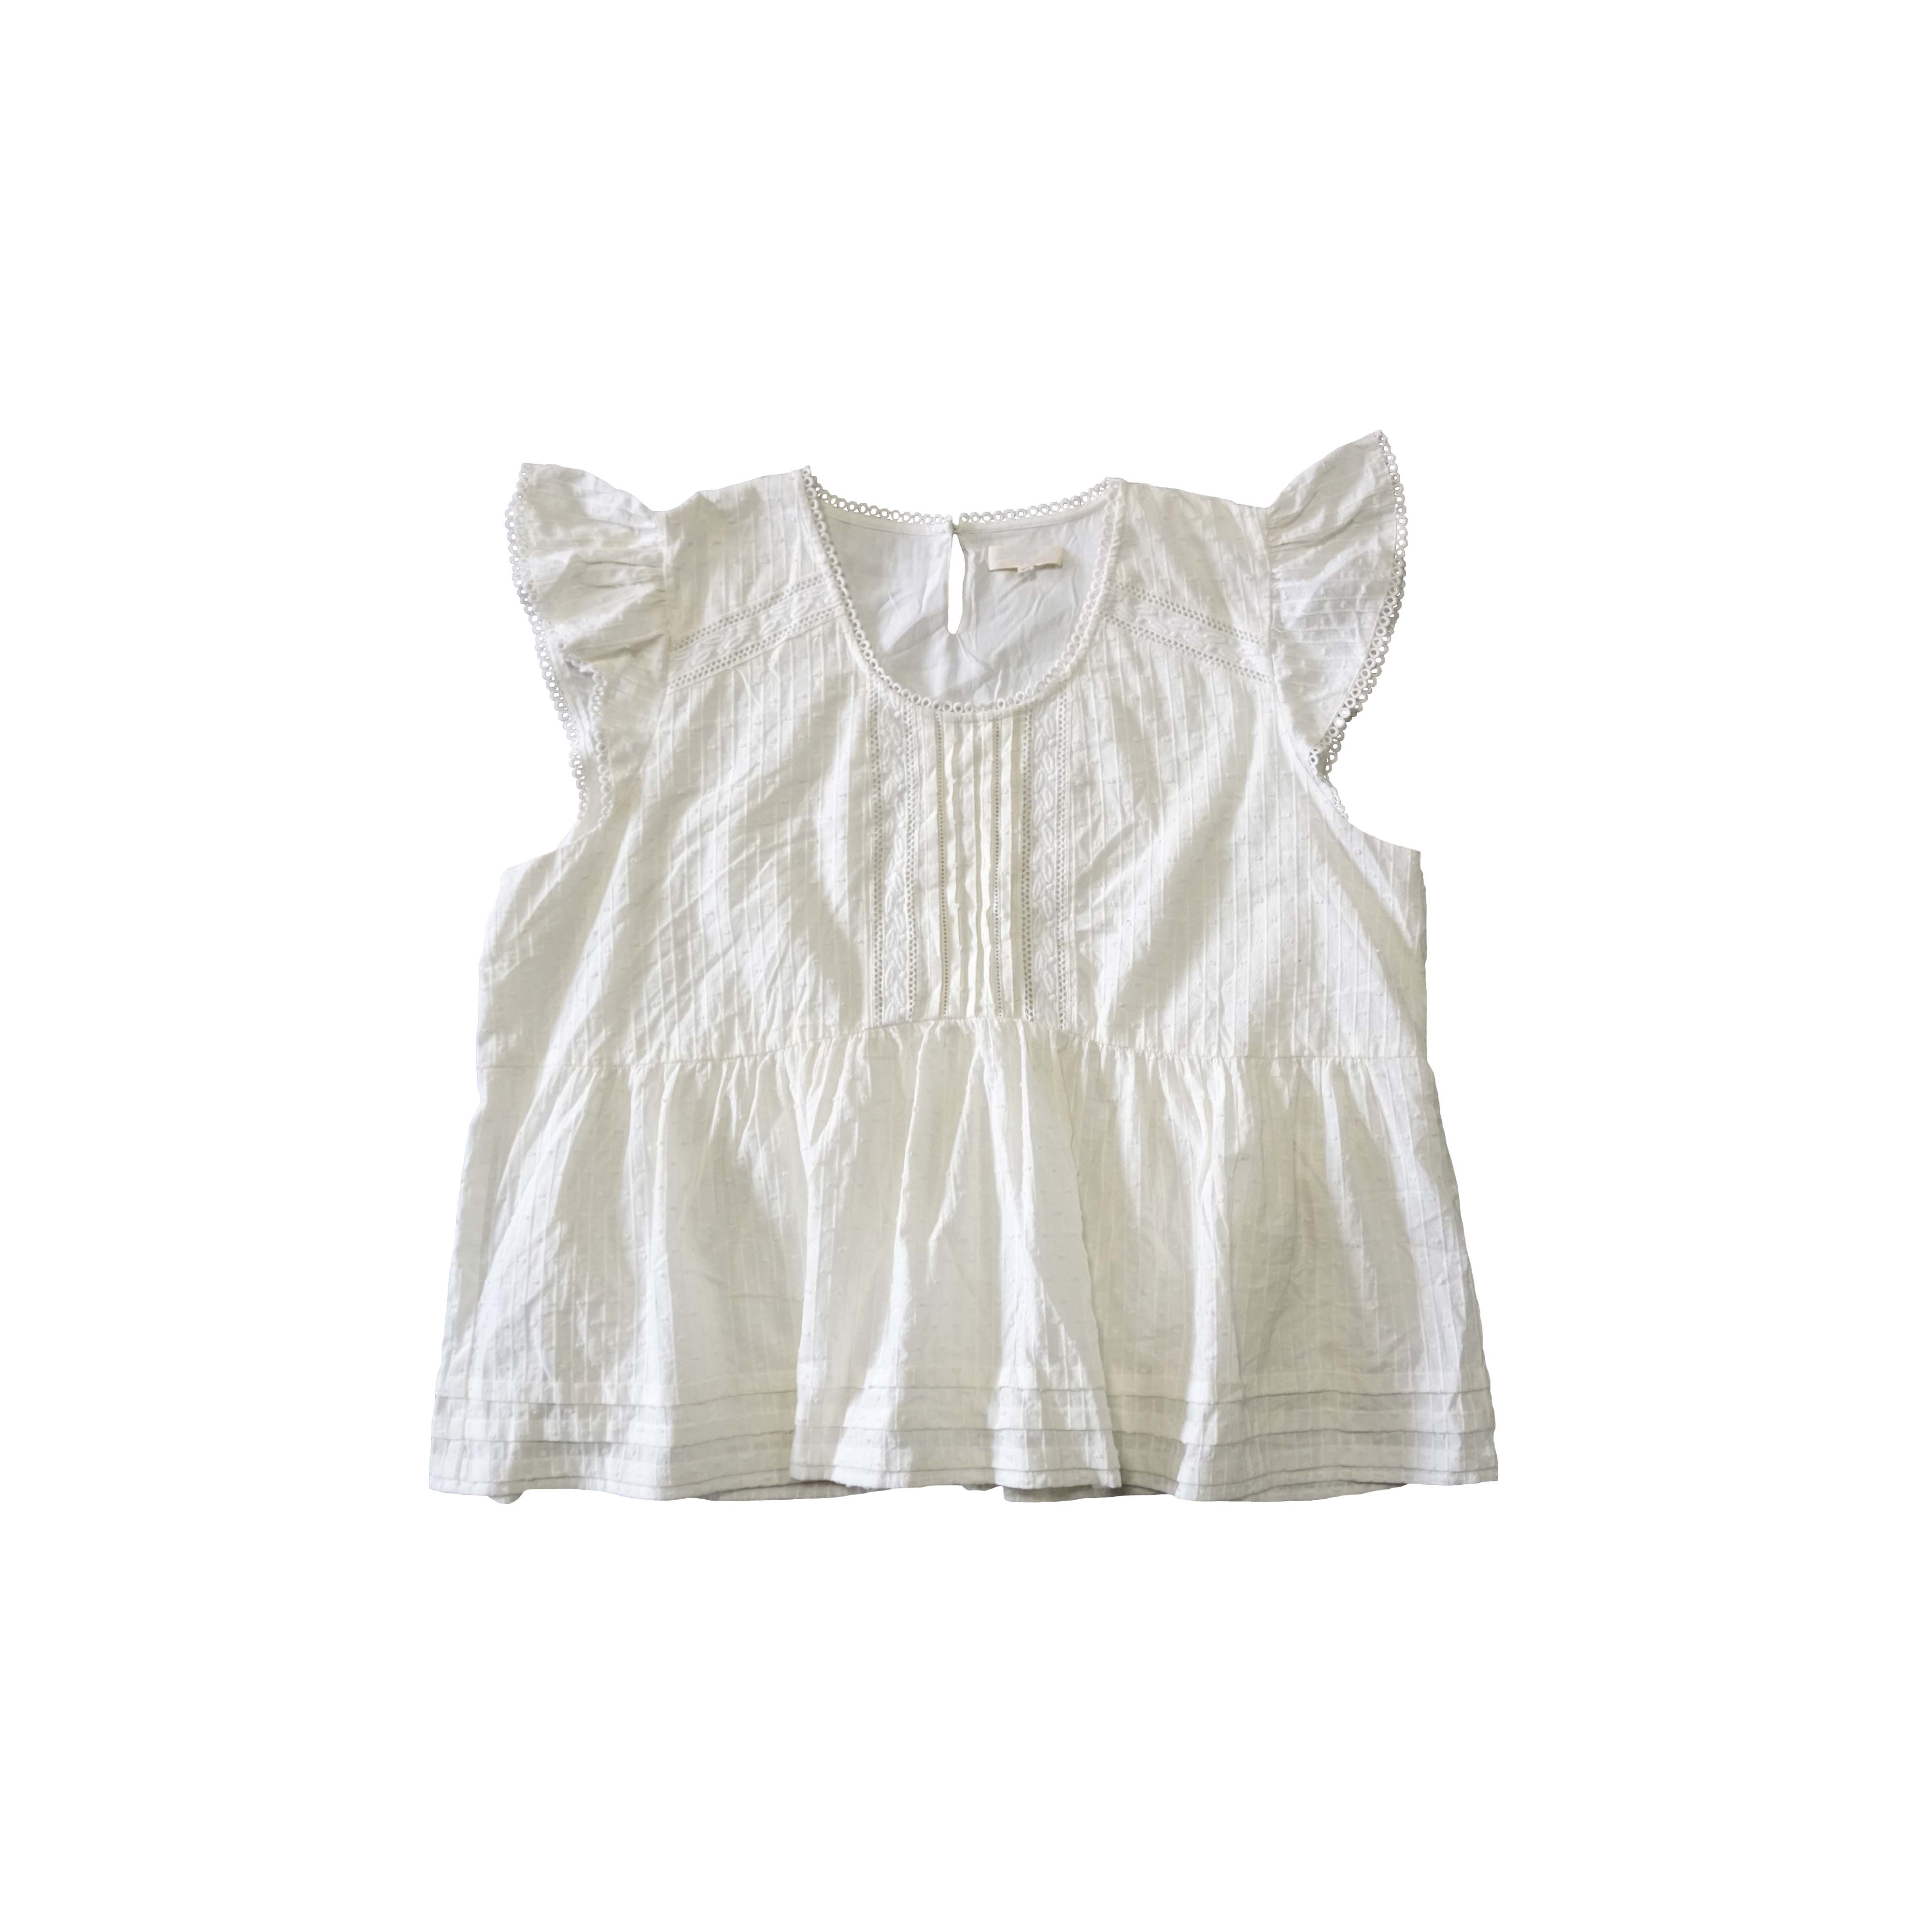 Sweet and cute cotton white women's top